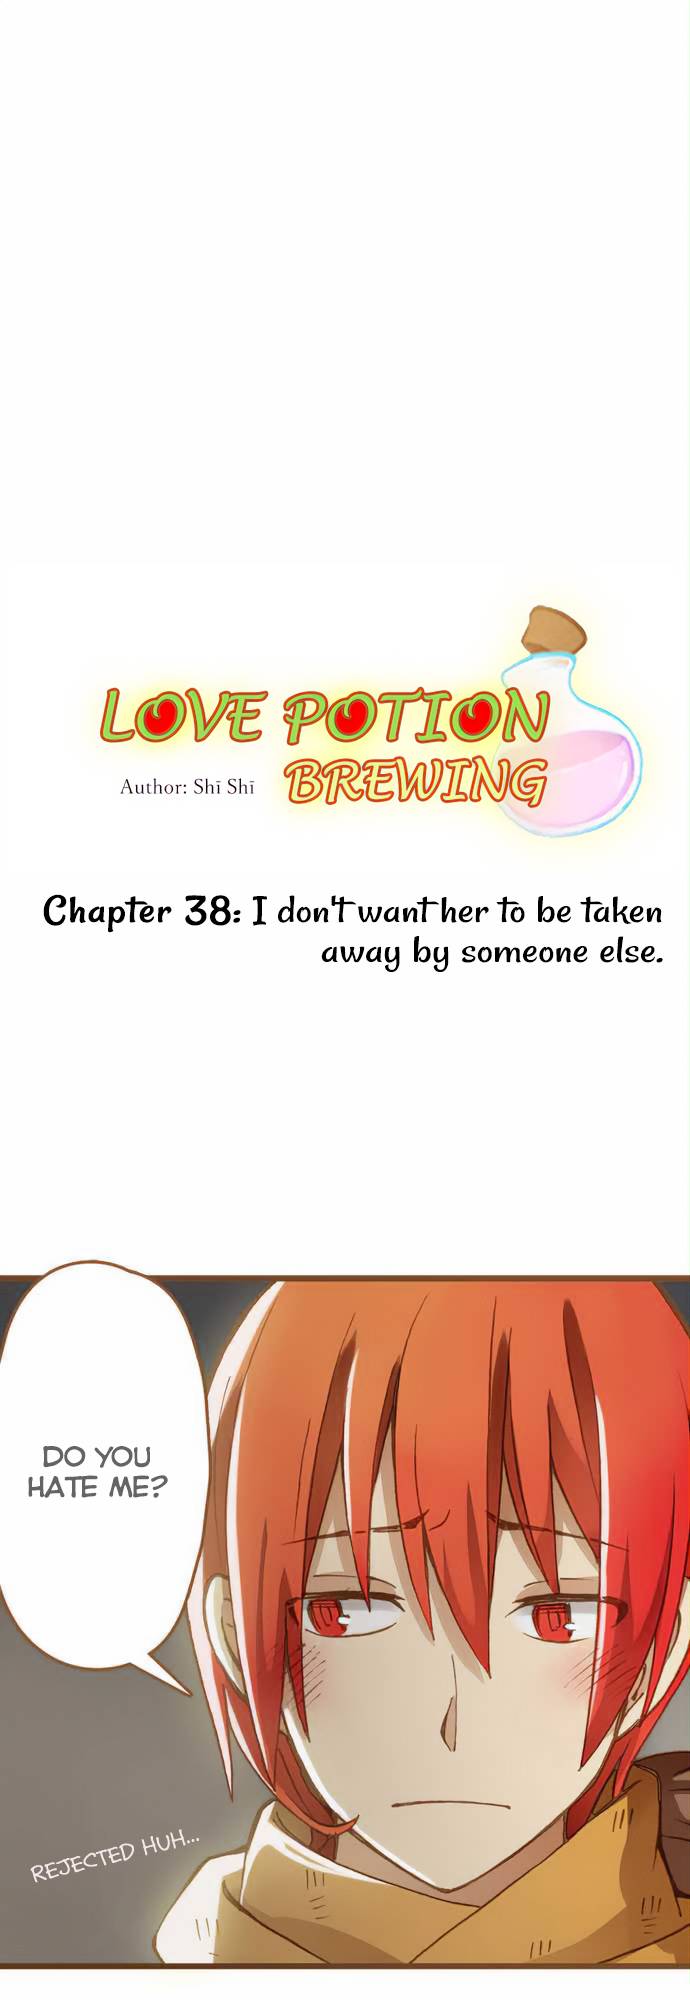 Love Potion Brewing - Page 1